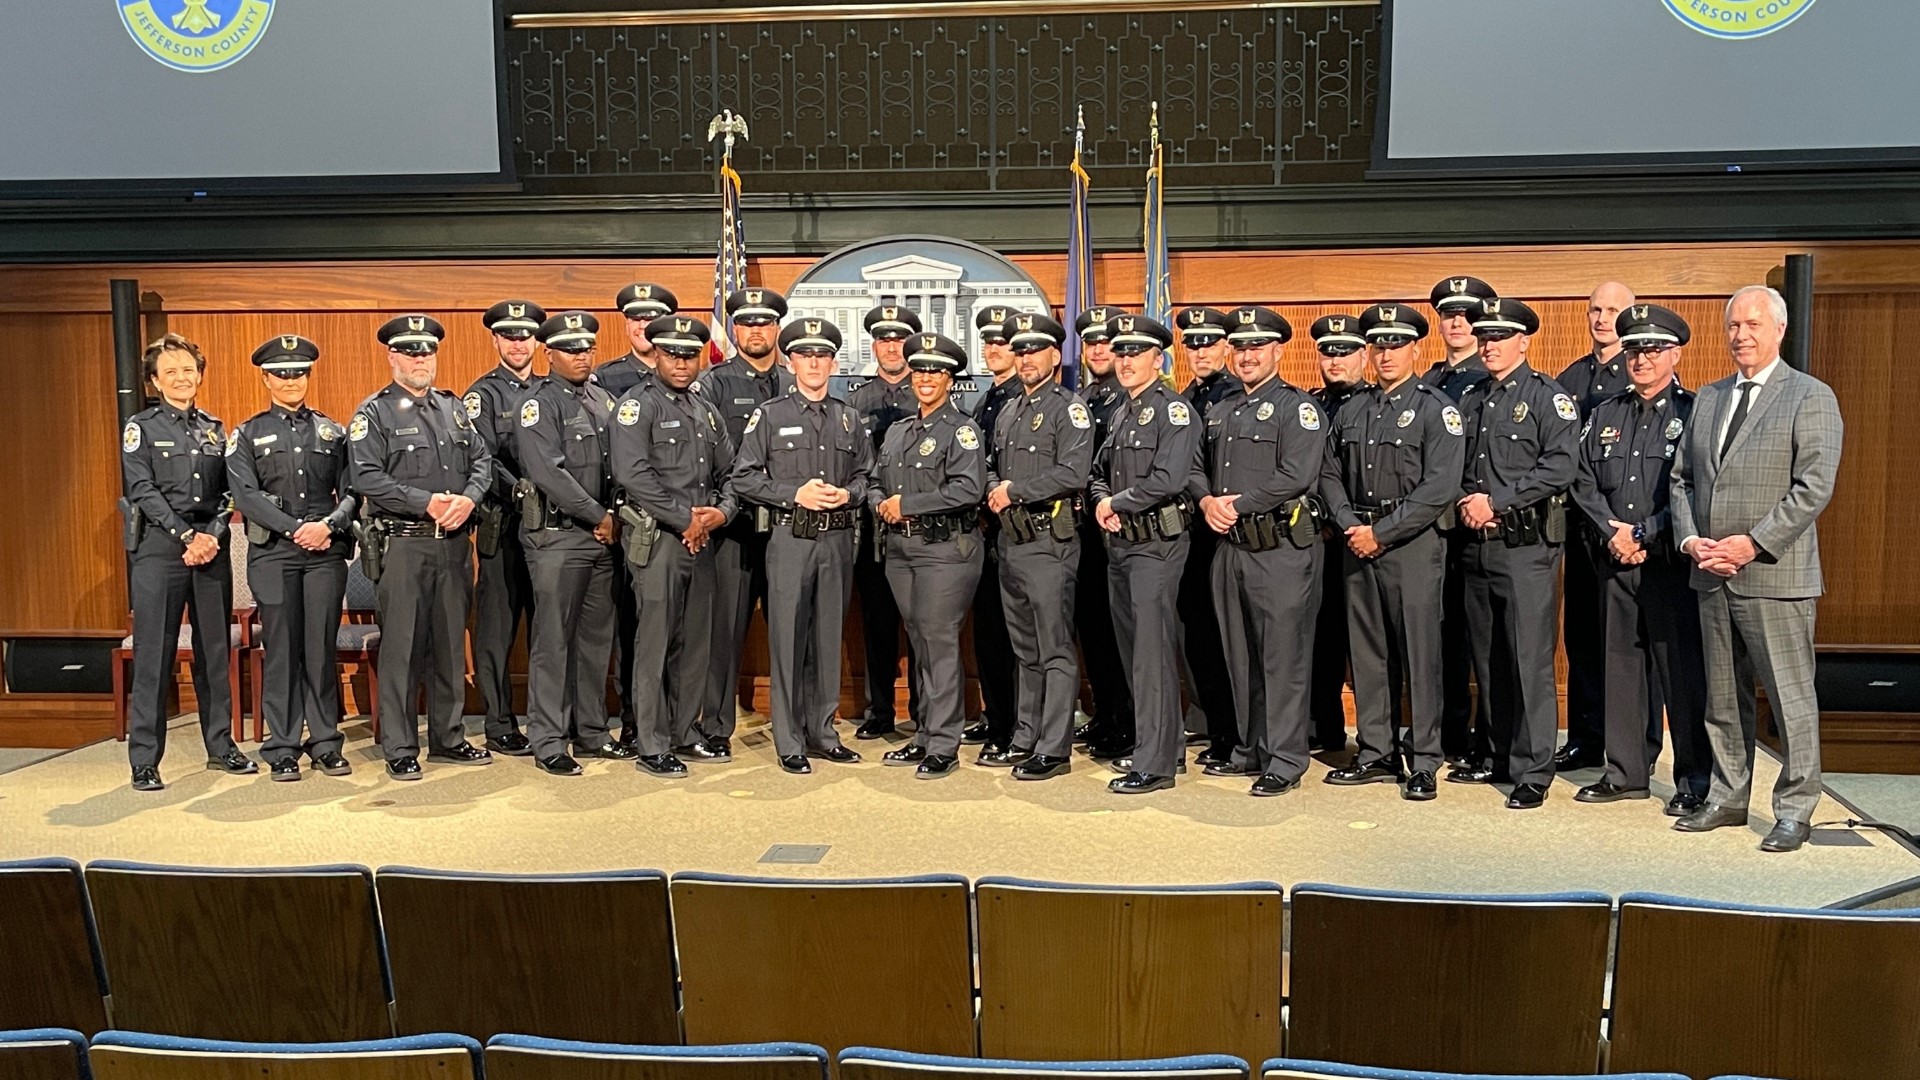 Louisville Metro Police Chief Erika Shields emphasized to the new recruits that officers should conduct themselves in a proper manner or face the consequences.